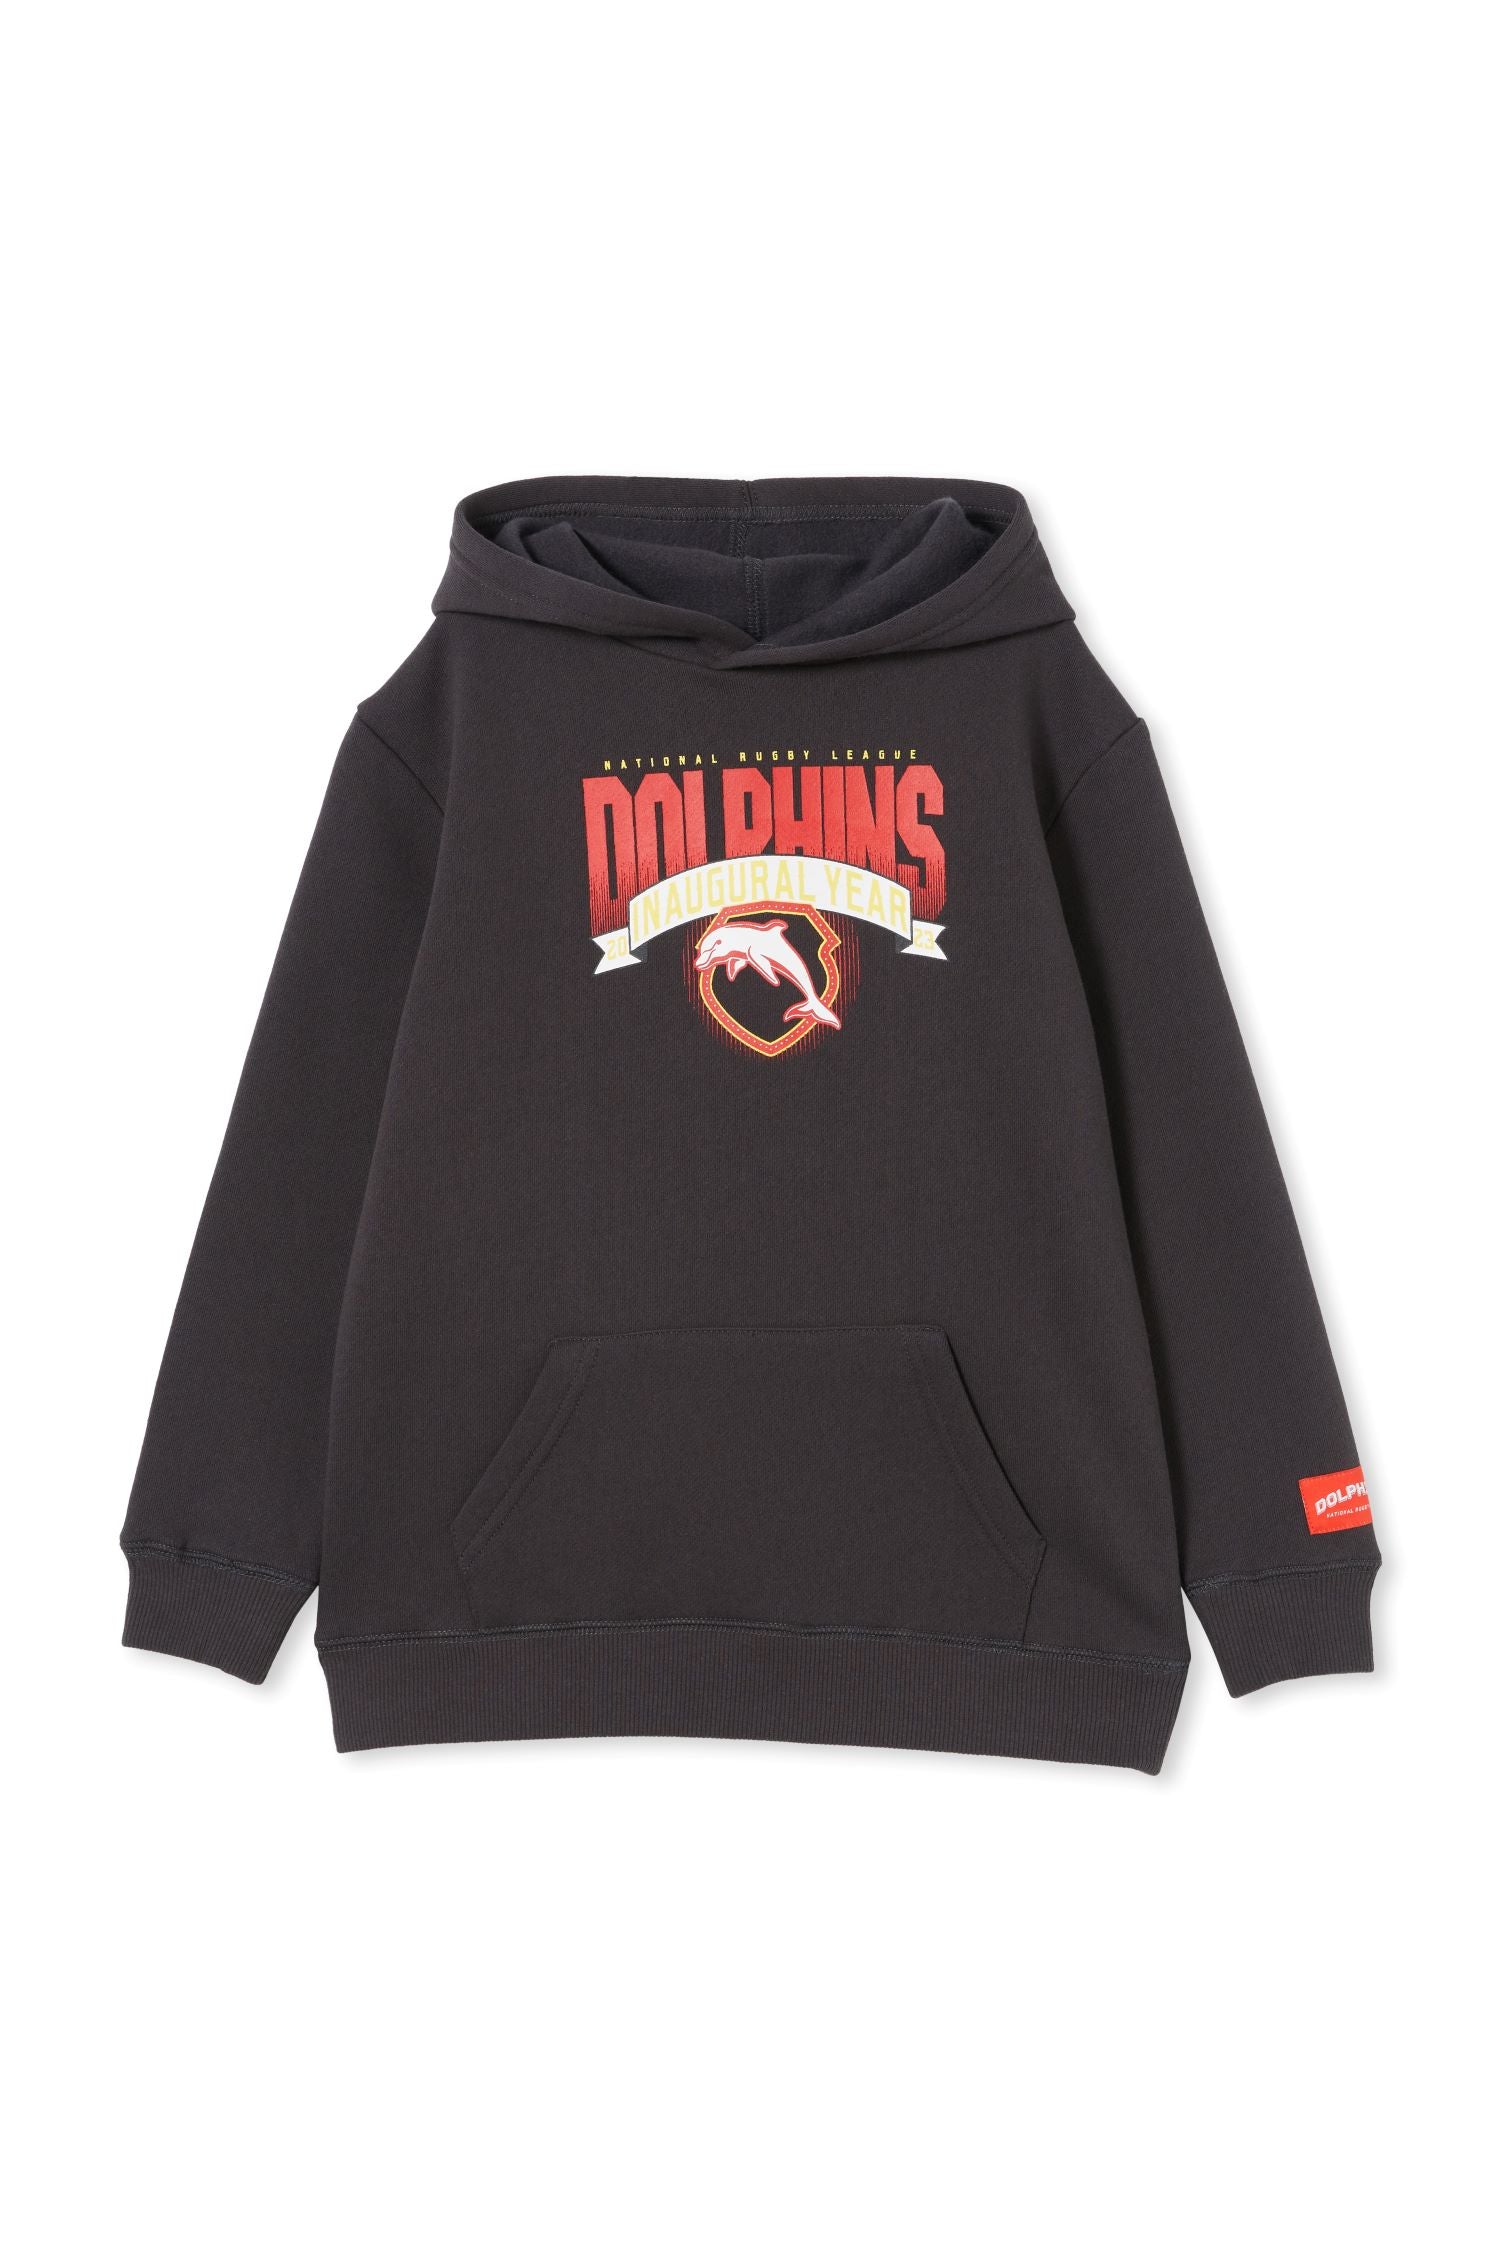 DOLPHINS YOUTH TEAM BANNER HOODIE